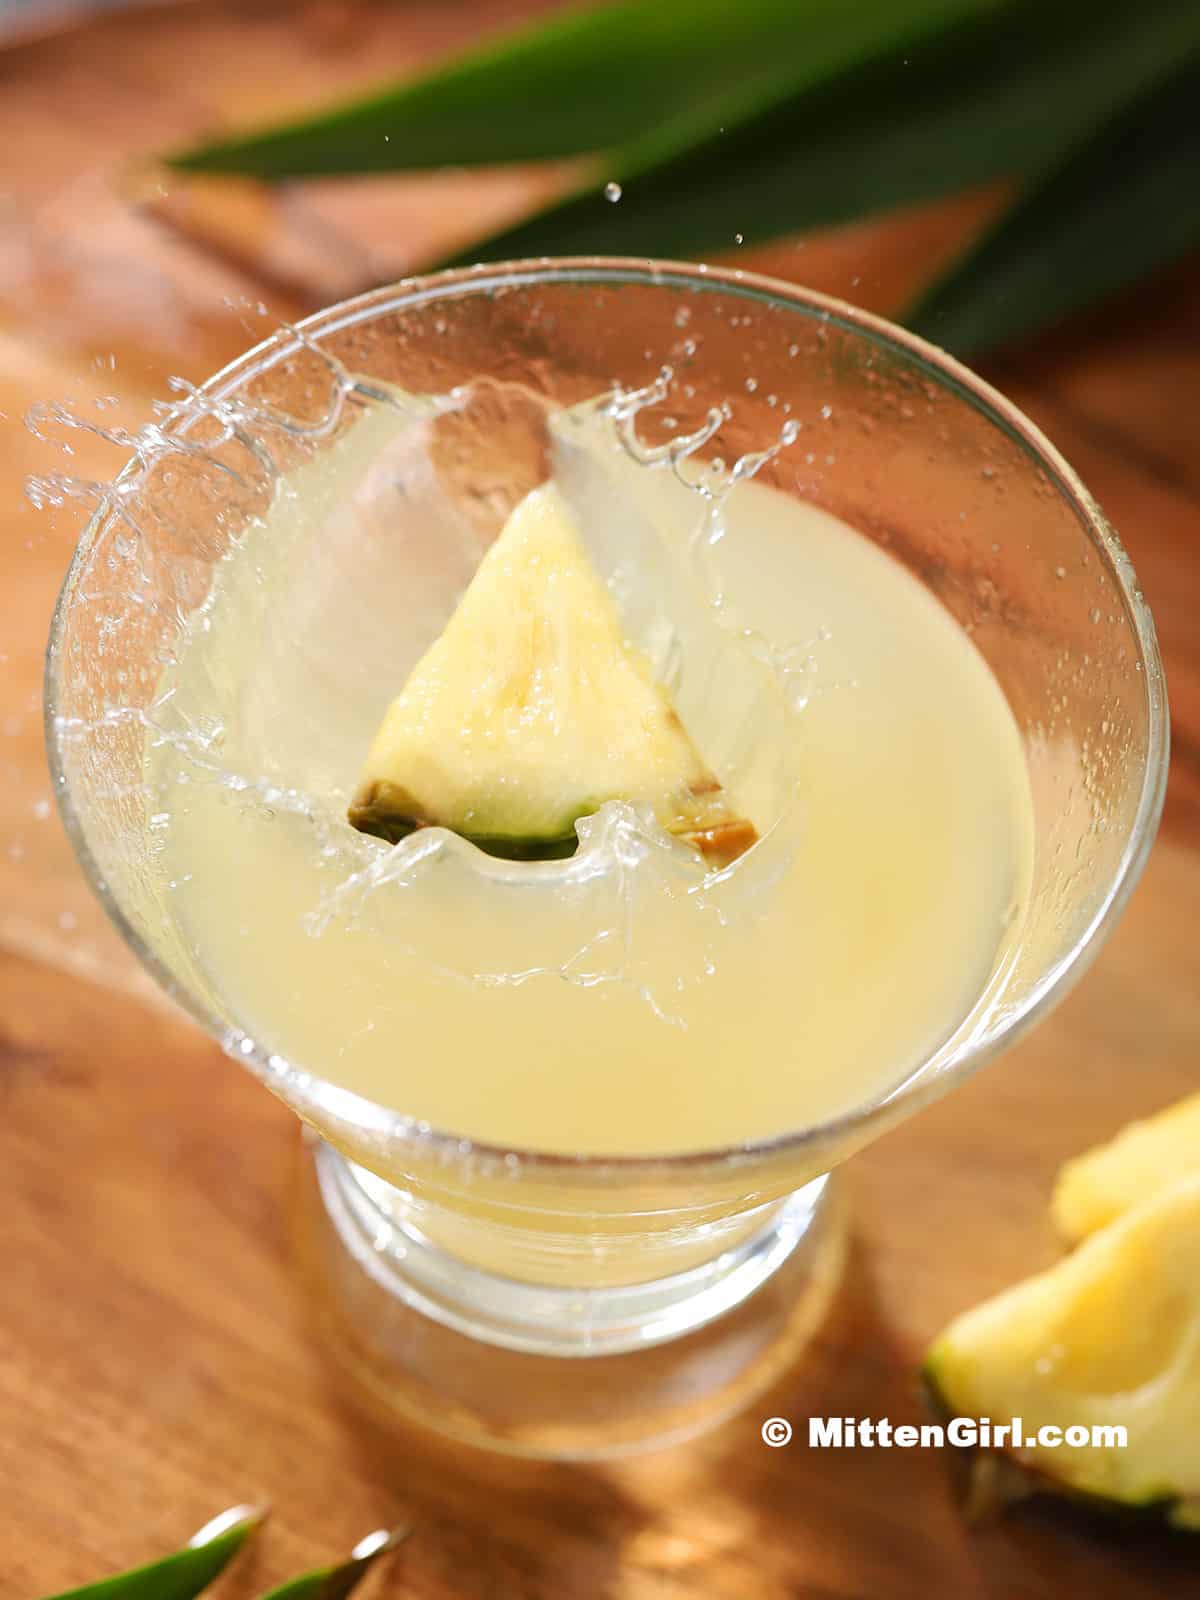 A pineapple wedge splashing down into a martini glass full of cocktail.